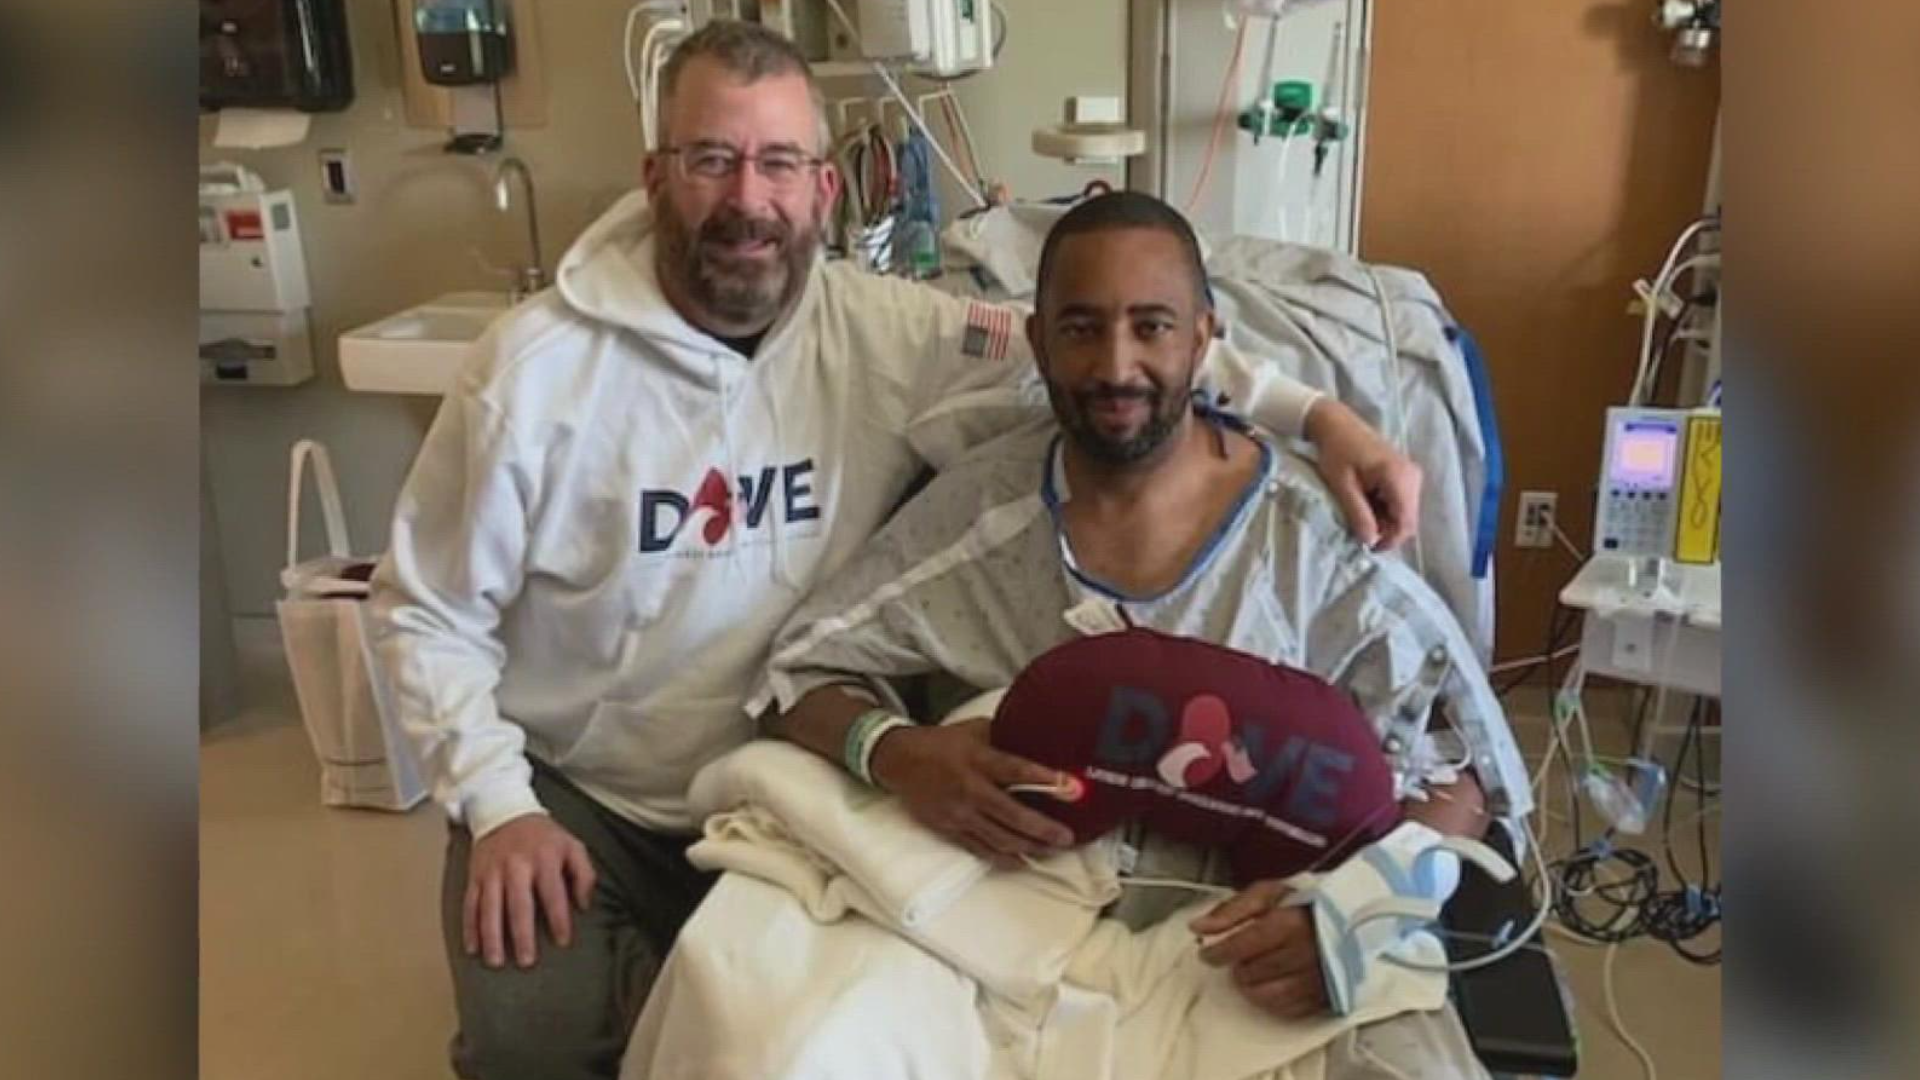 DOVE Transplant, an organization that finds donors for veterans, helped discover the two detectives were a perfect match for kidney donation.